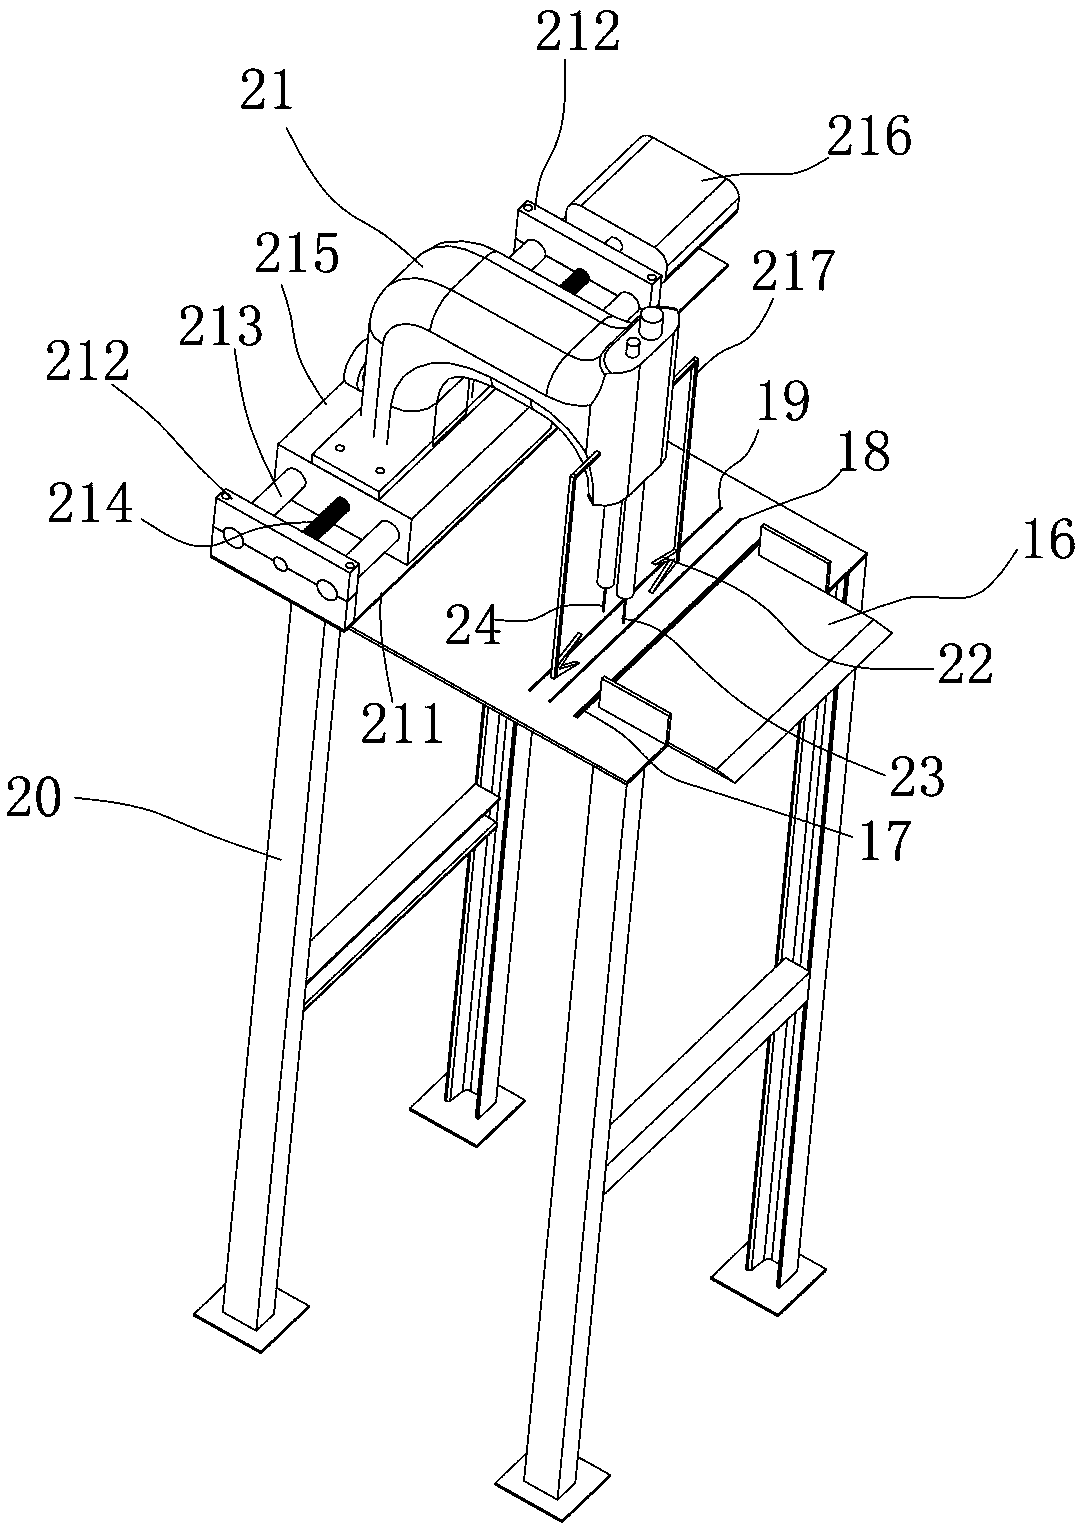 Automatic packaging machine for reinforcing steel bar connecting sleeve